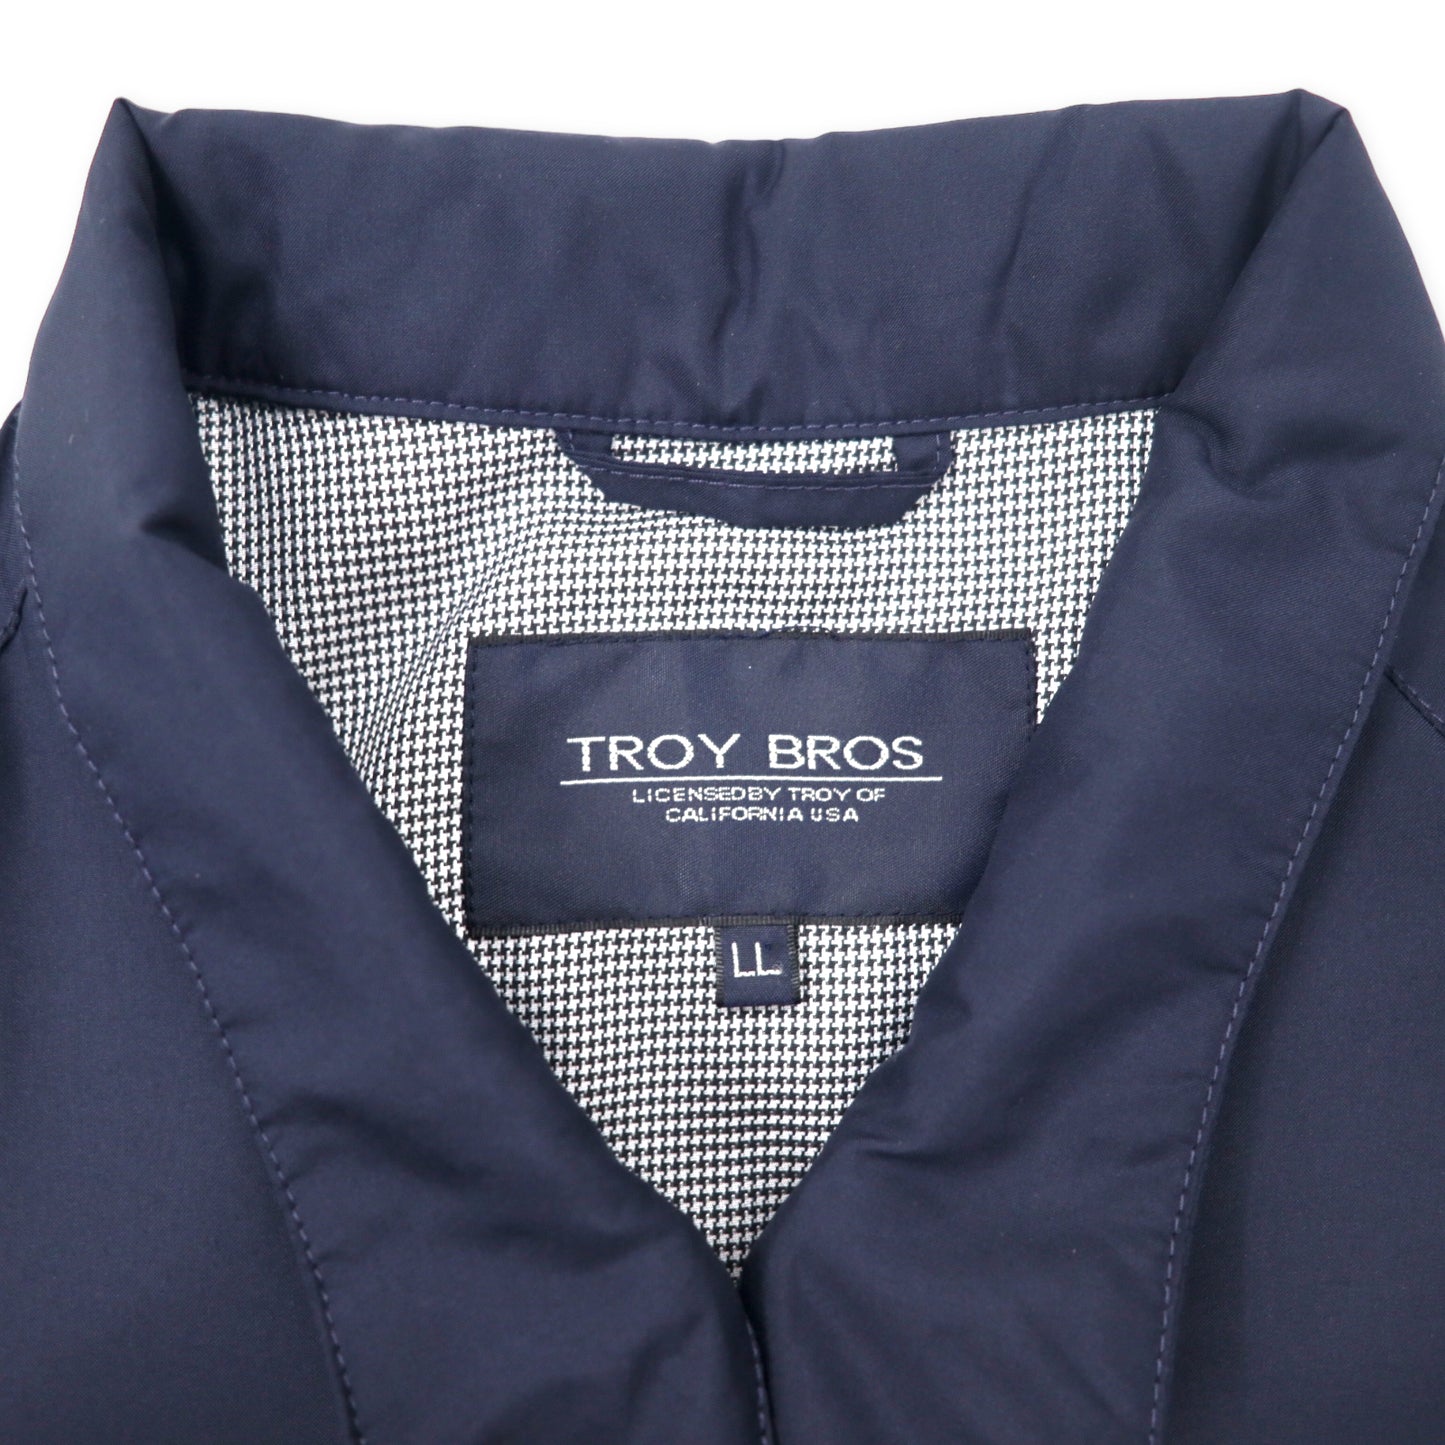 TROY BROS Swing Top Harrington Jacket LL Navy Polyester One Point 